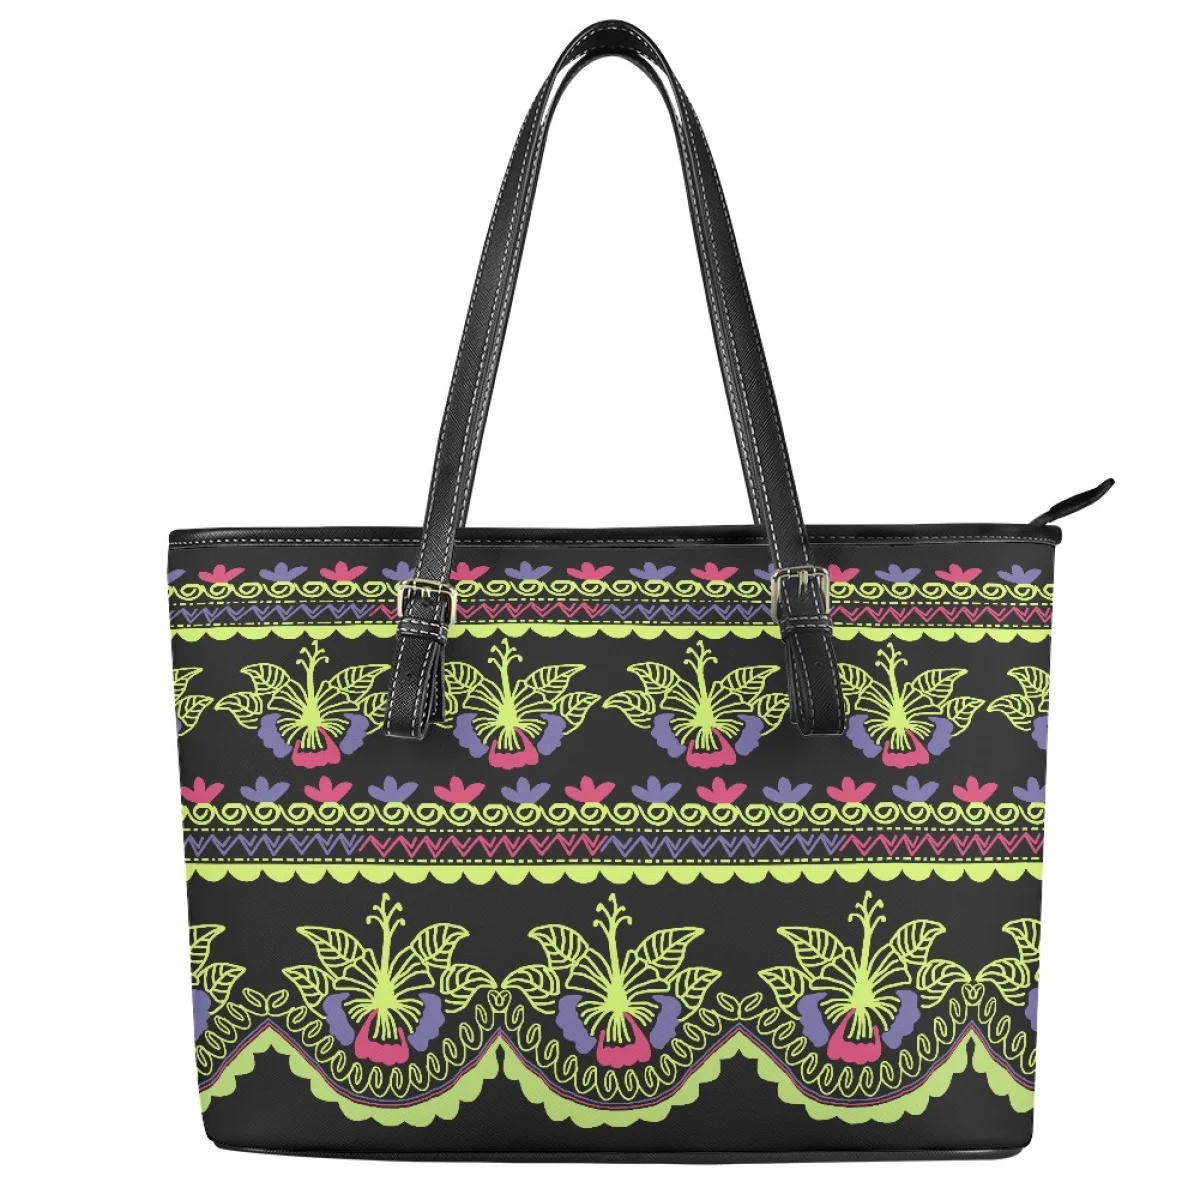 New Polynesian traditional tribal style Pattern Print custom Large Leather Tote Bag Shoulder Ladies Handbags and purses